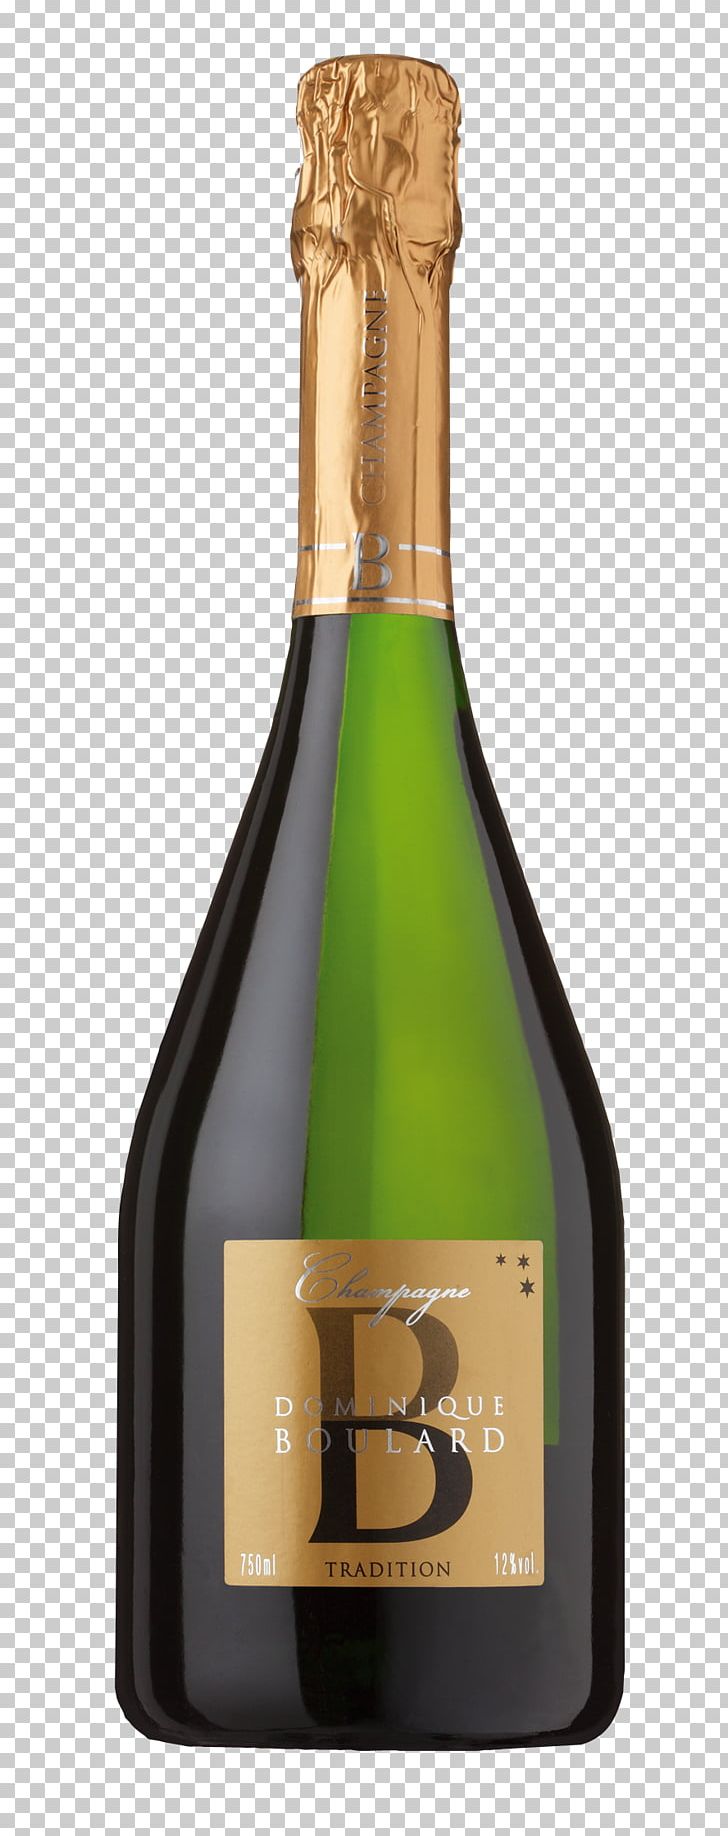 Champagne Liqueur Glass Bottle PNG, Clipart, Alcoholic Beverage, Bottle, Champagne, Champagner, Drink Free PNG Download